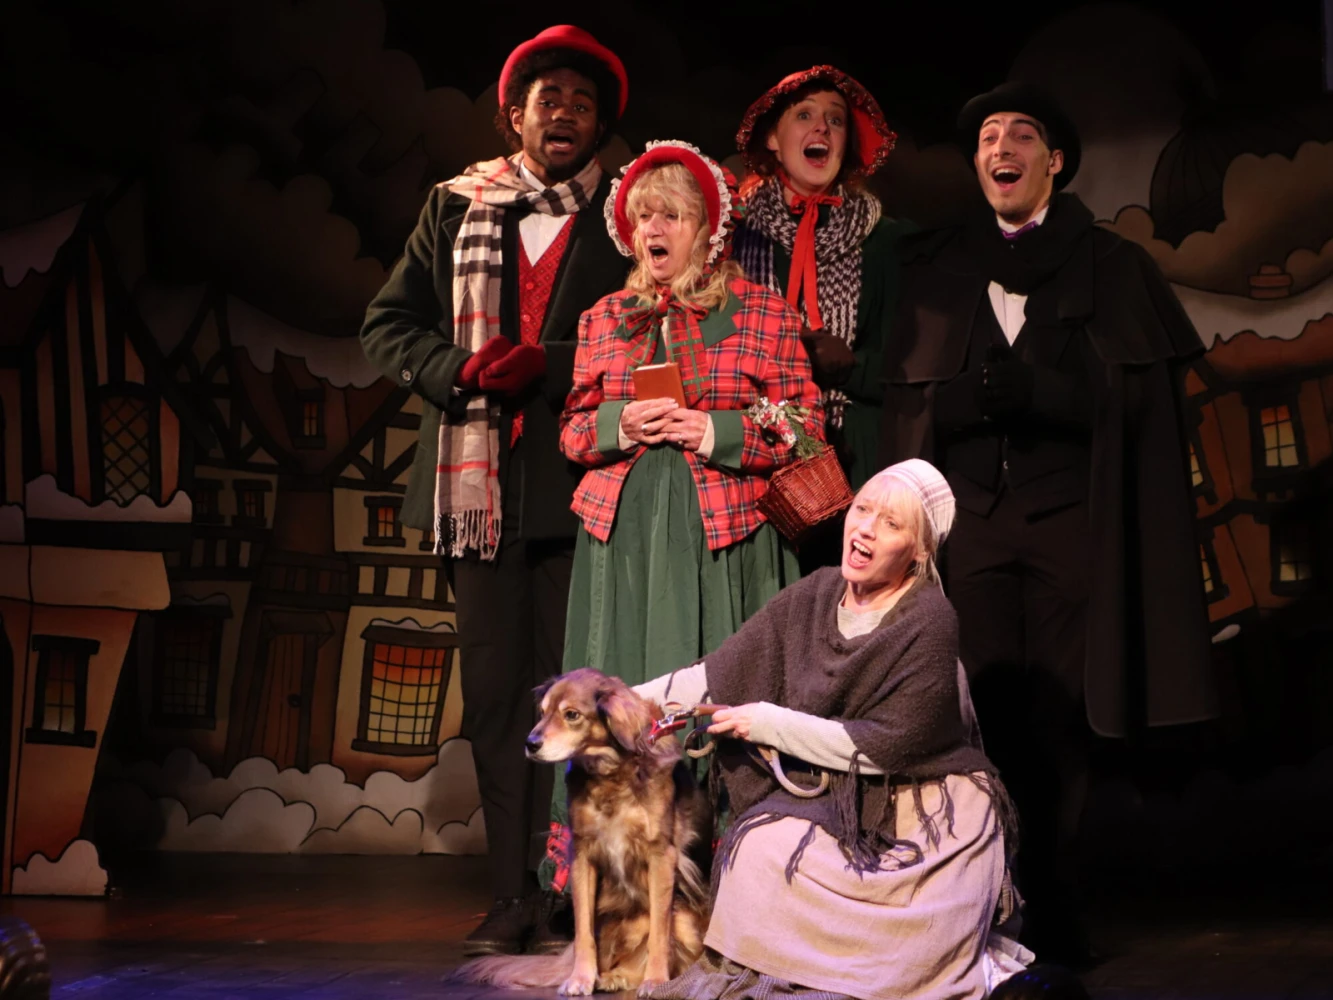 A Christmas Carol the Musical: What to expect - 2